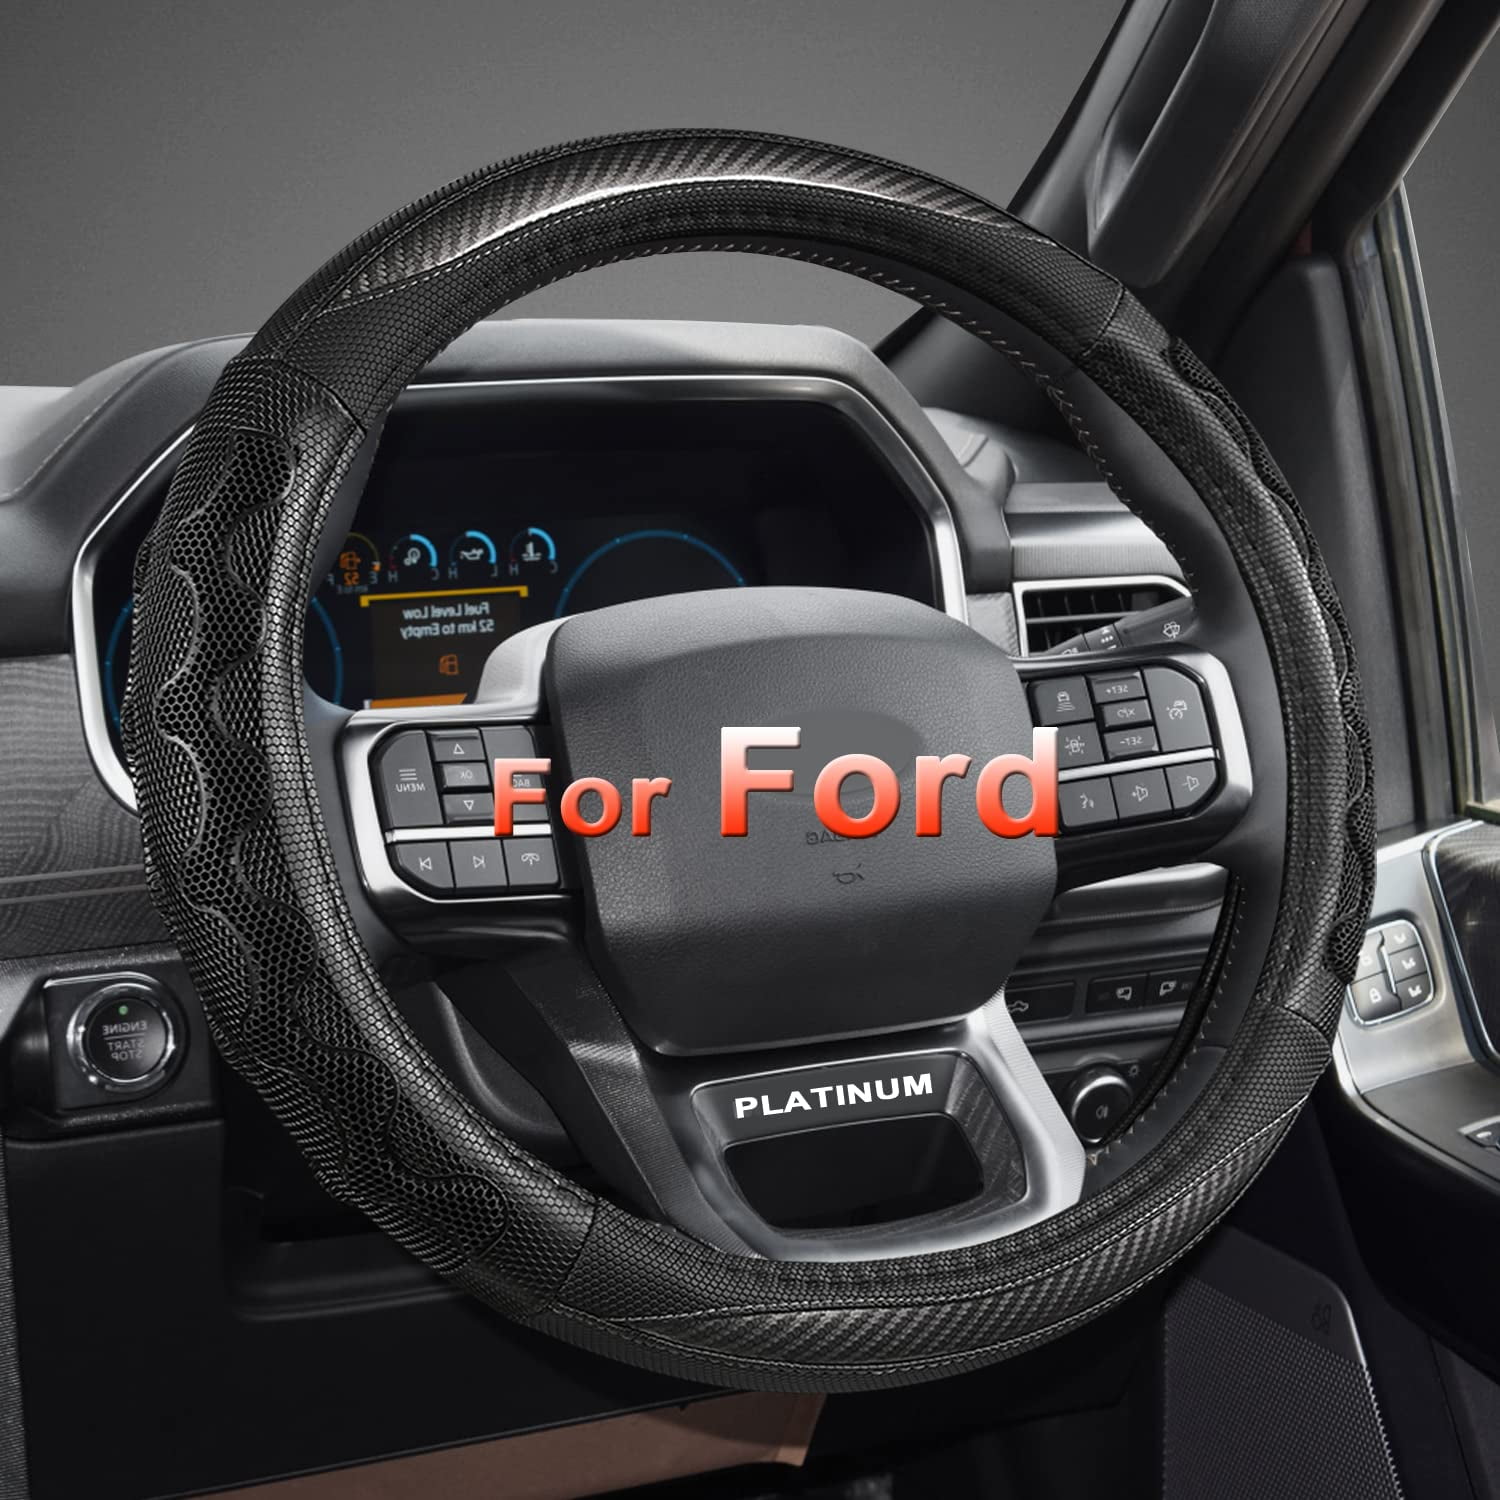 GIANT PANDA Car Steering Wheel Cover for Ford F150 F250 F350